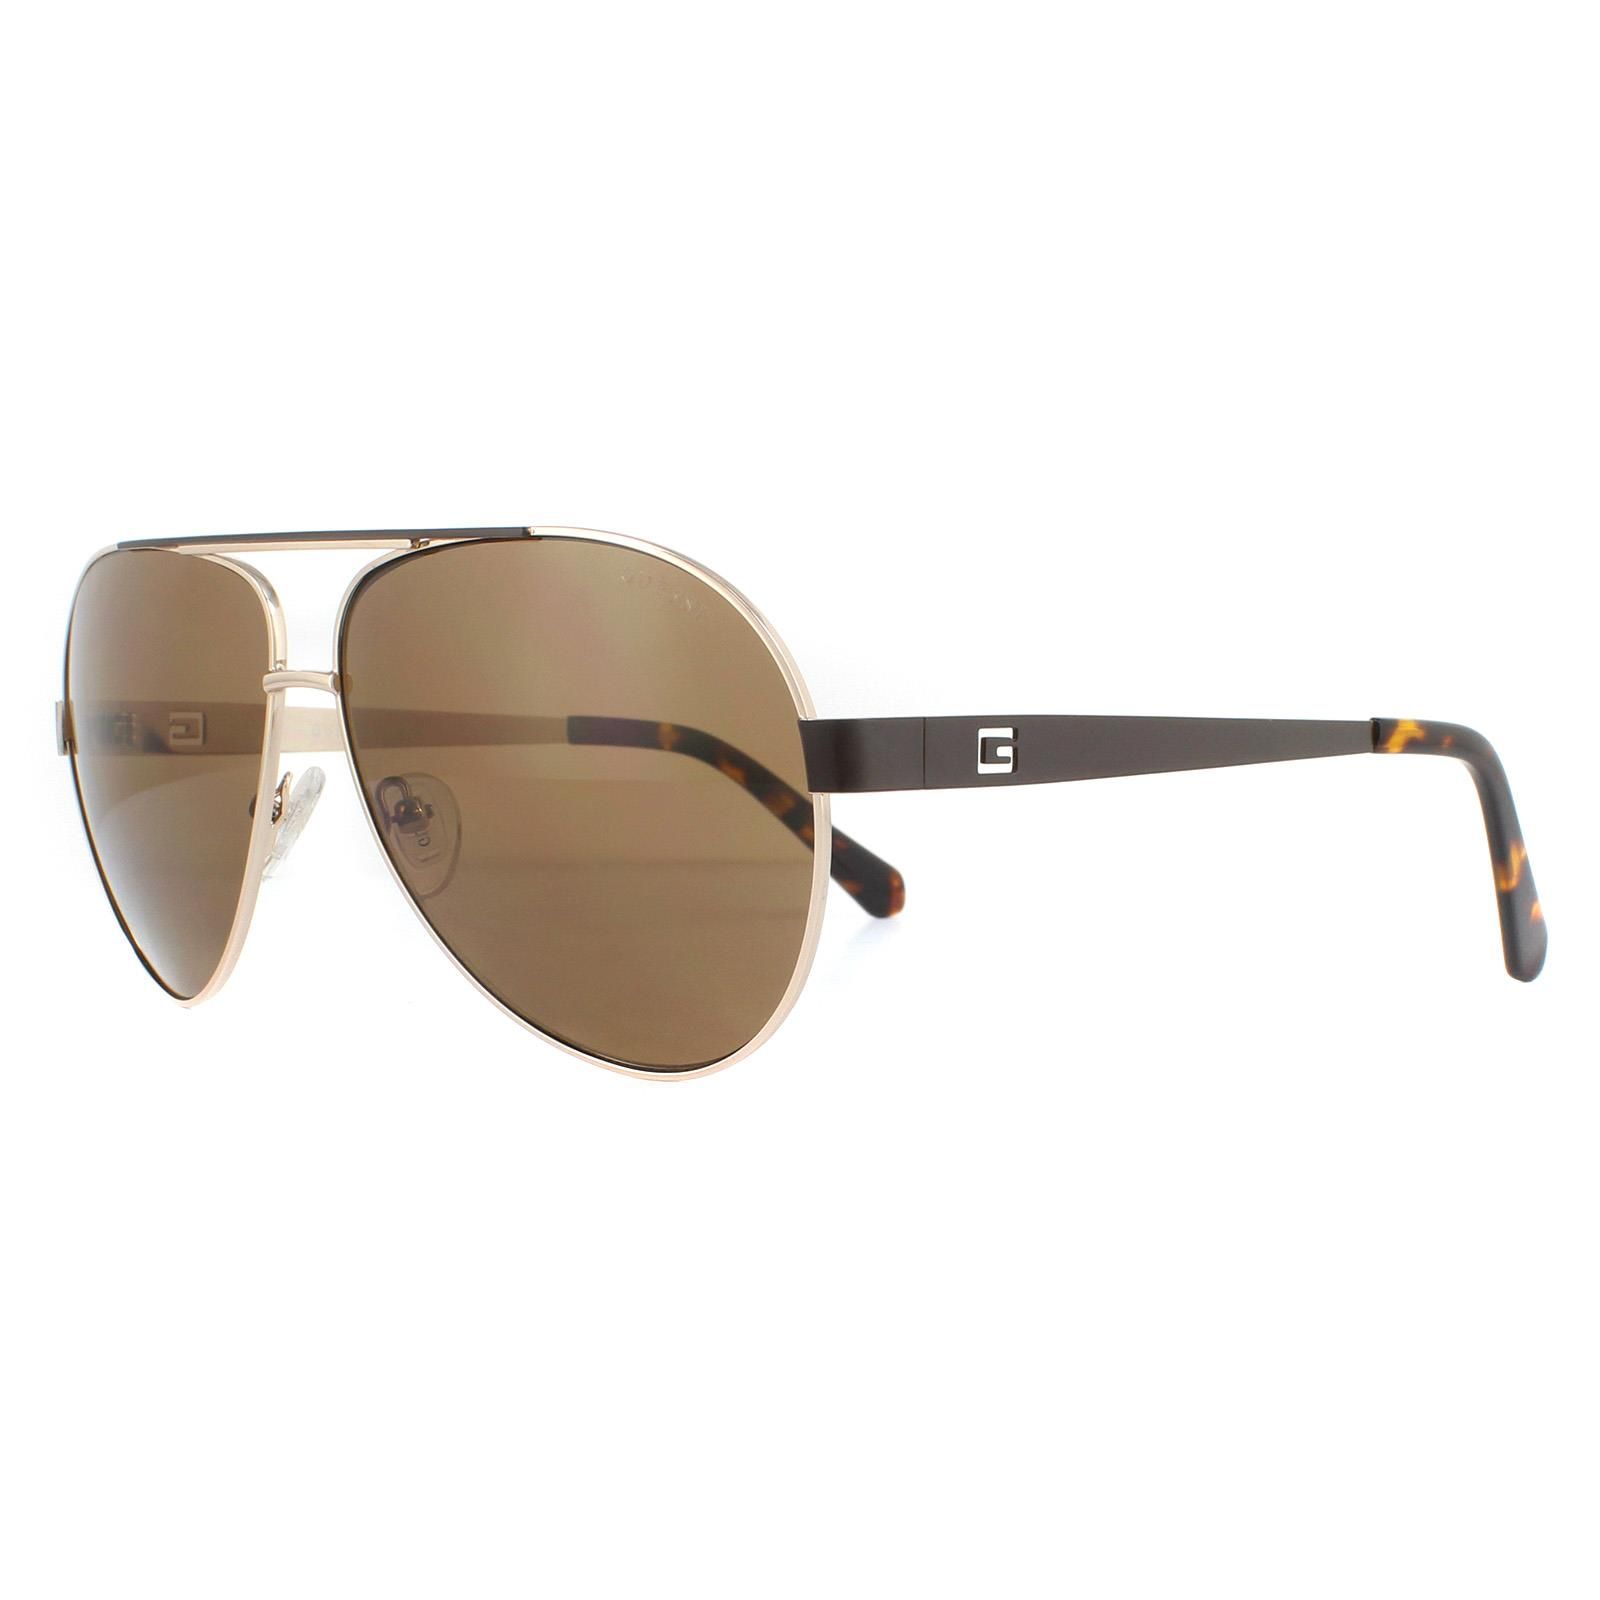 Guess Sunglasses GU6969 32H Gold Brown Polarized are a large lens aviator style with cut-out Guess G logo on the temples. The temple colours match the top brow bar for a unique two-tone effect.